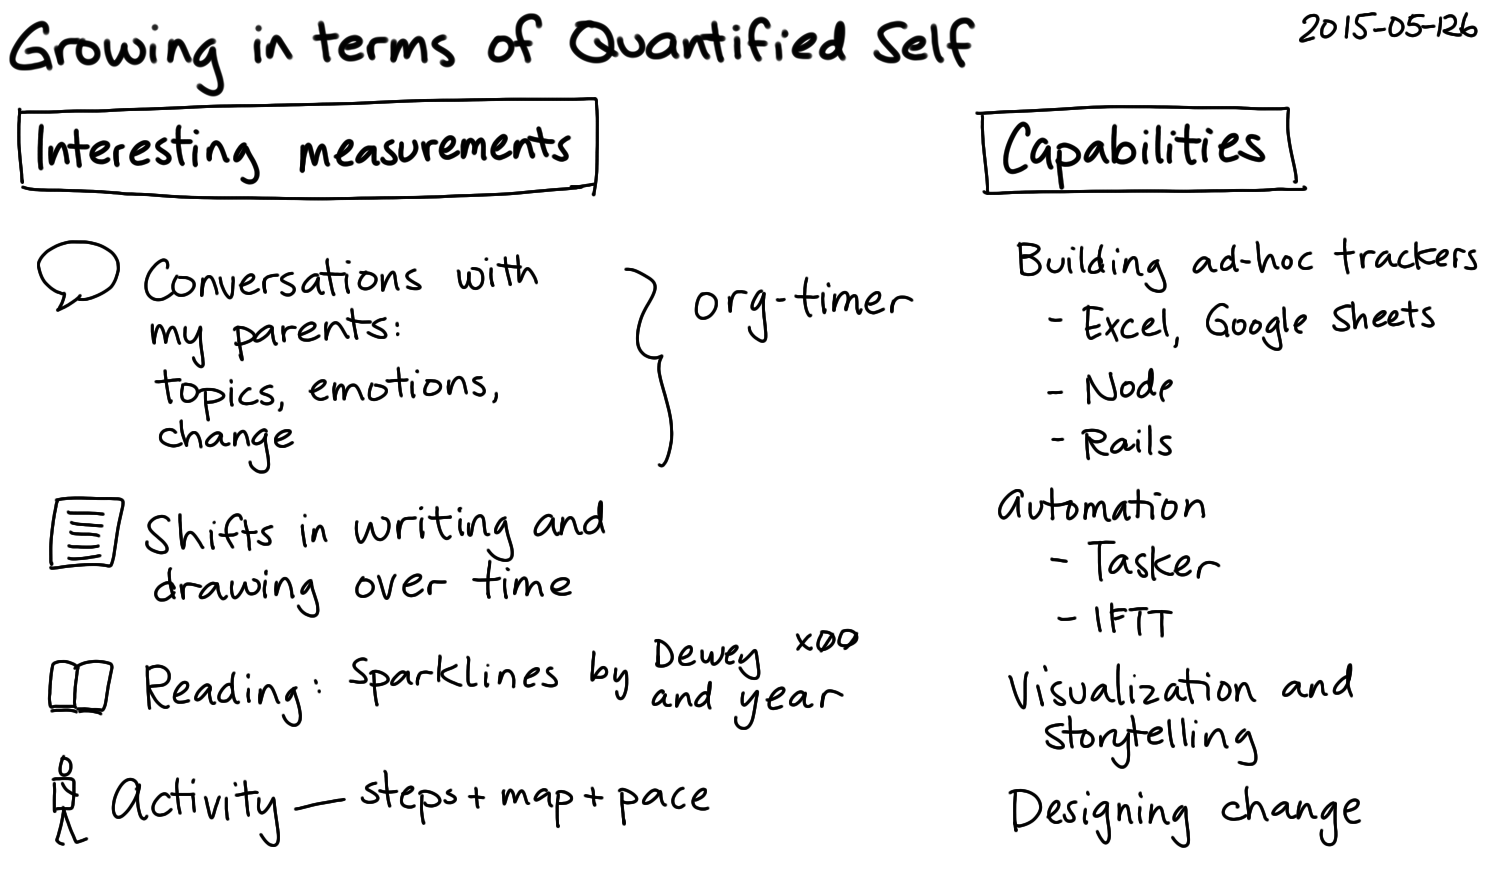 2015-05-12b Growing in terms of Quantified Self -- index card #quantified.png